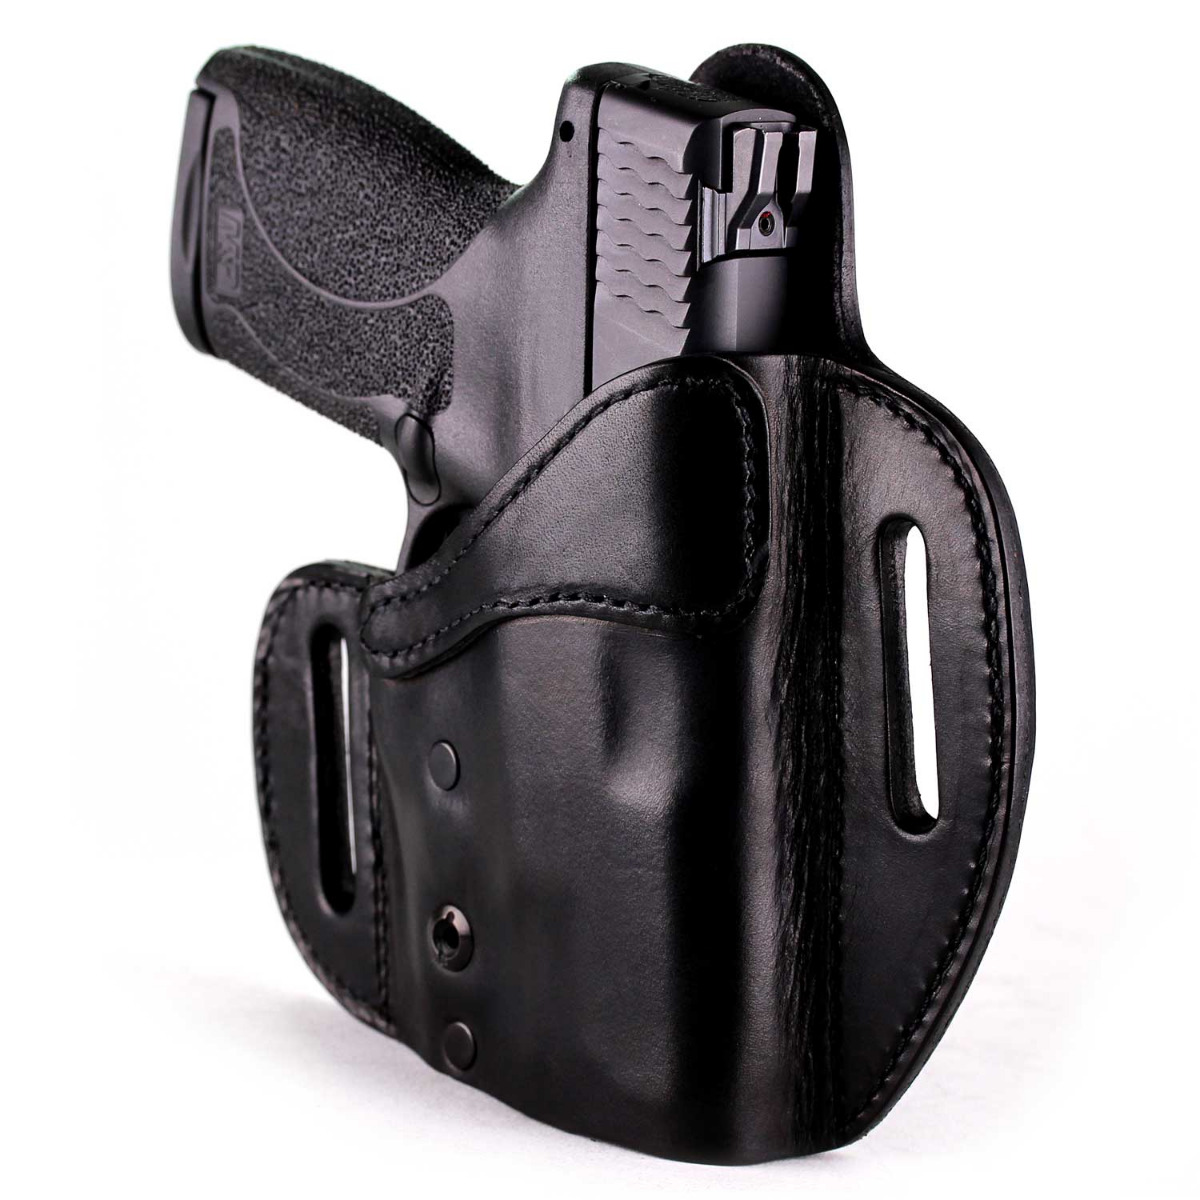 IWI BABY EAGLE SEMI-COMPACT CONCEALED IWB HOLSTER BY ACE CASE MADE IN U.S.A.* 